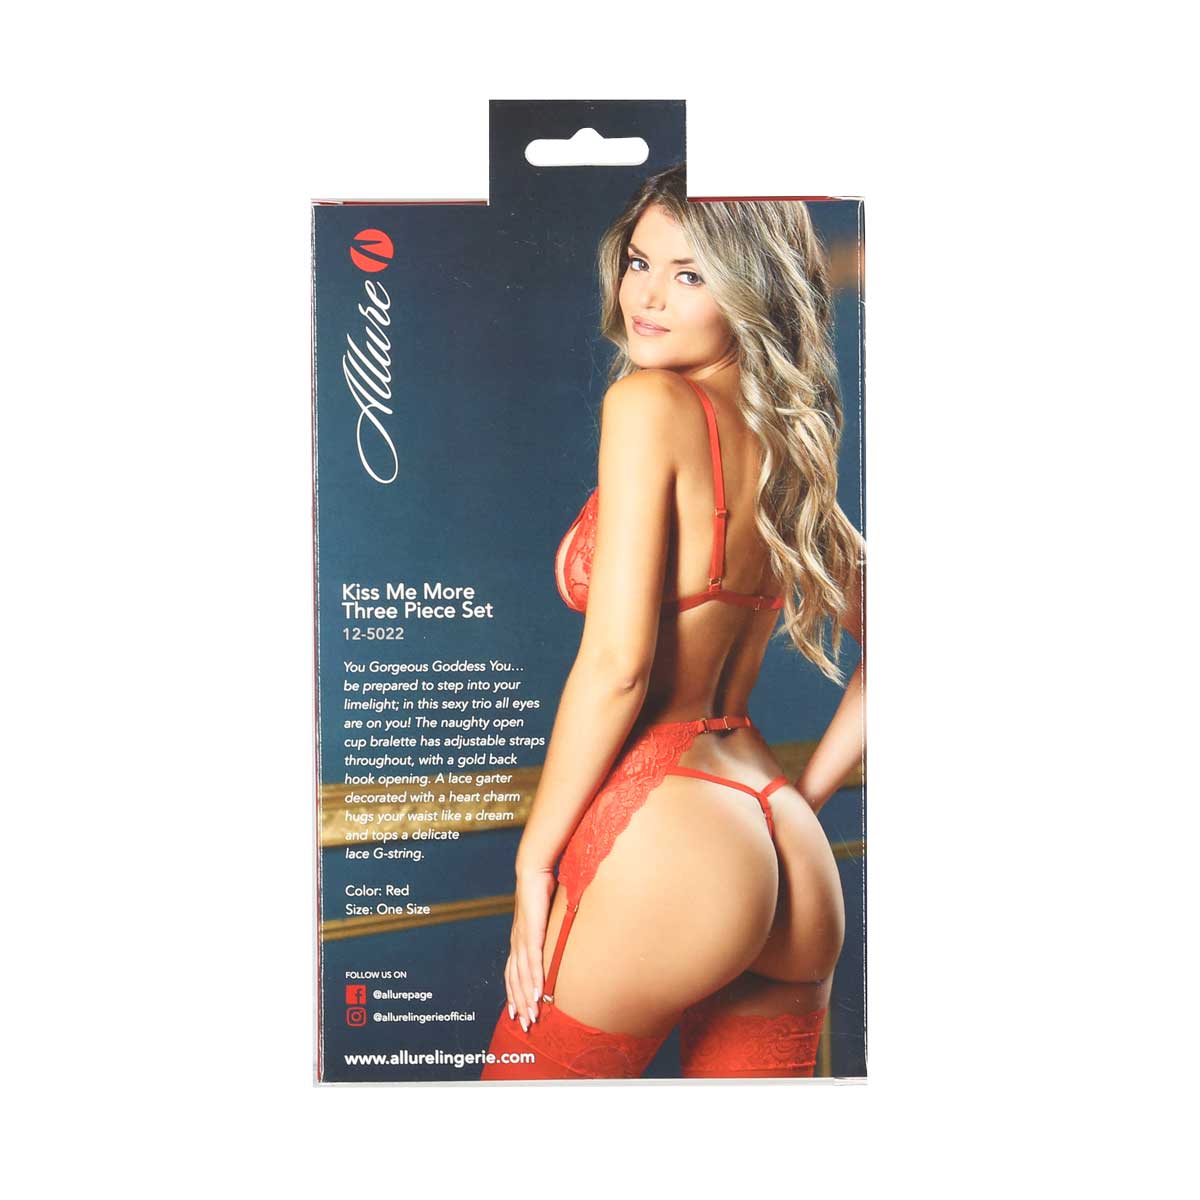 Allure – Kiss Me More 3 Piece Set – Red – One Size